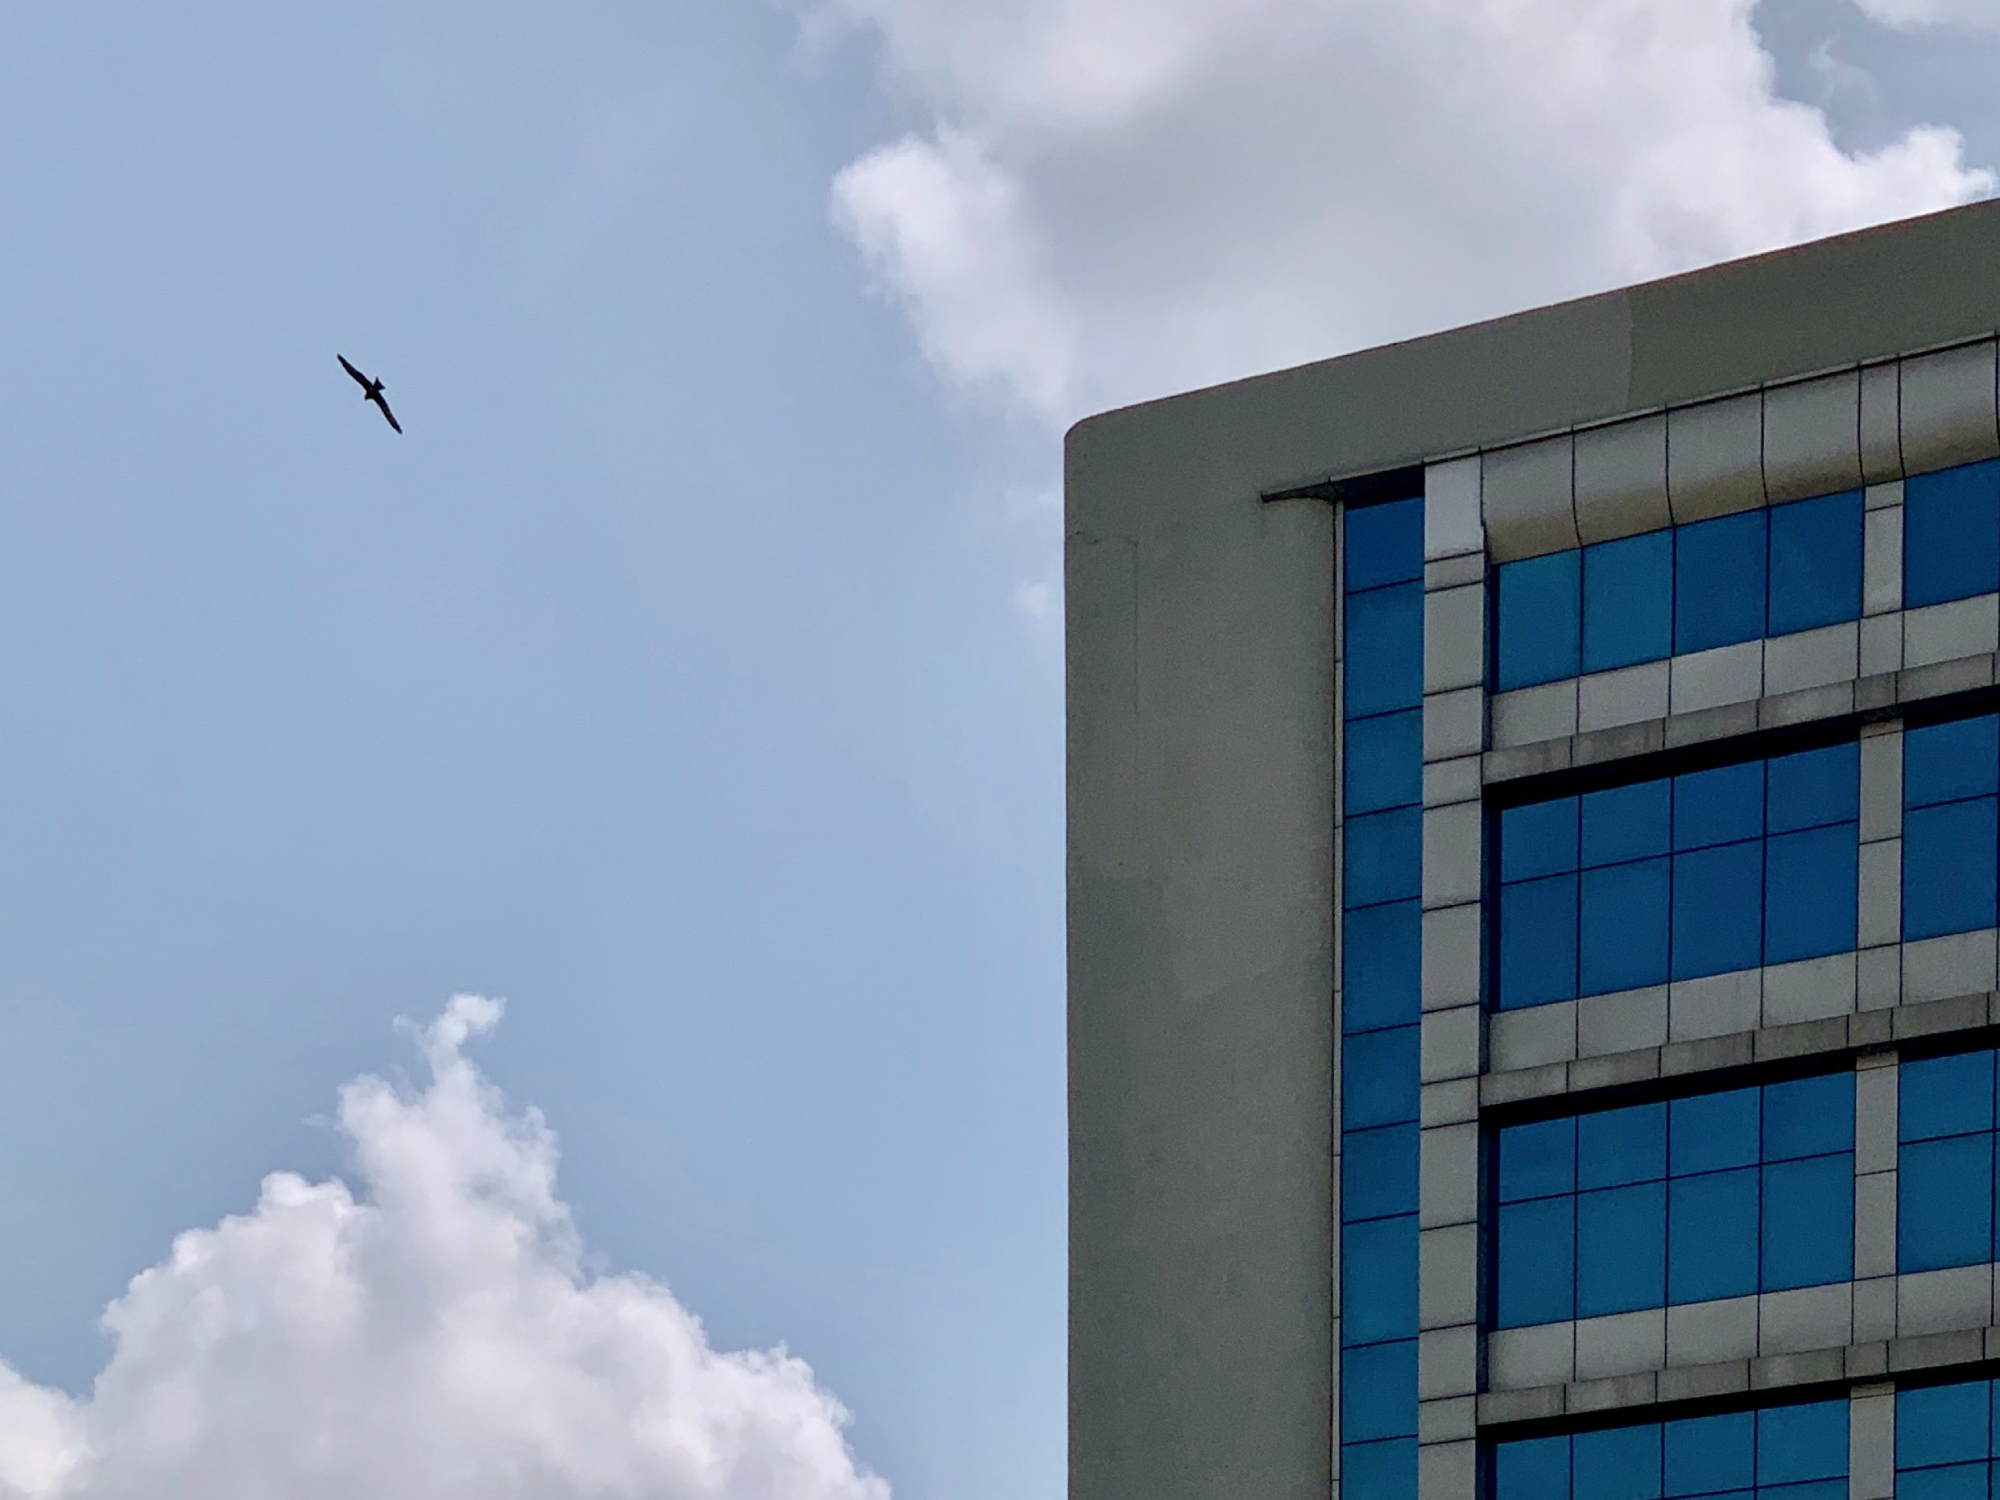 A bird flying near a concrete commercial building with large windows on a sunny day.